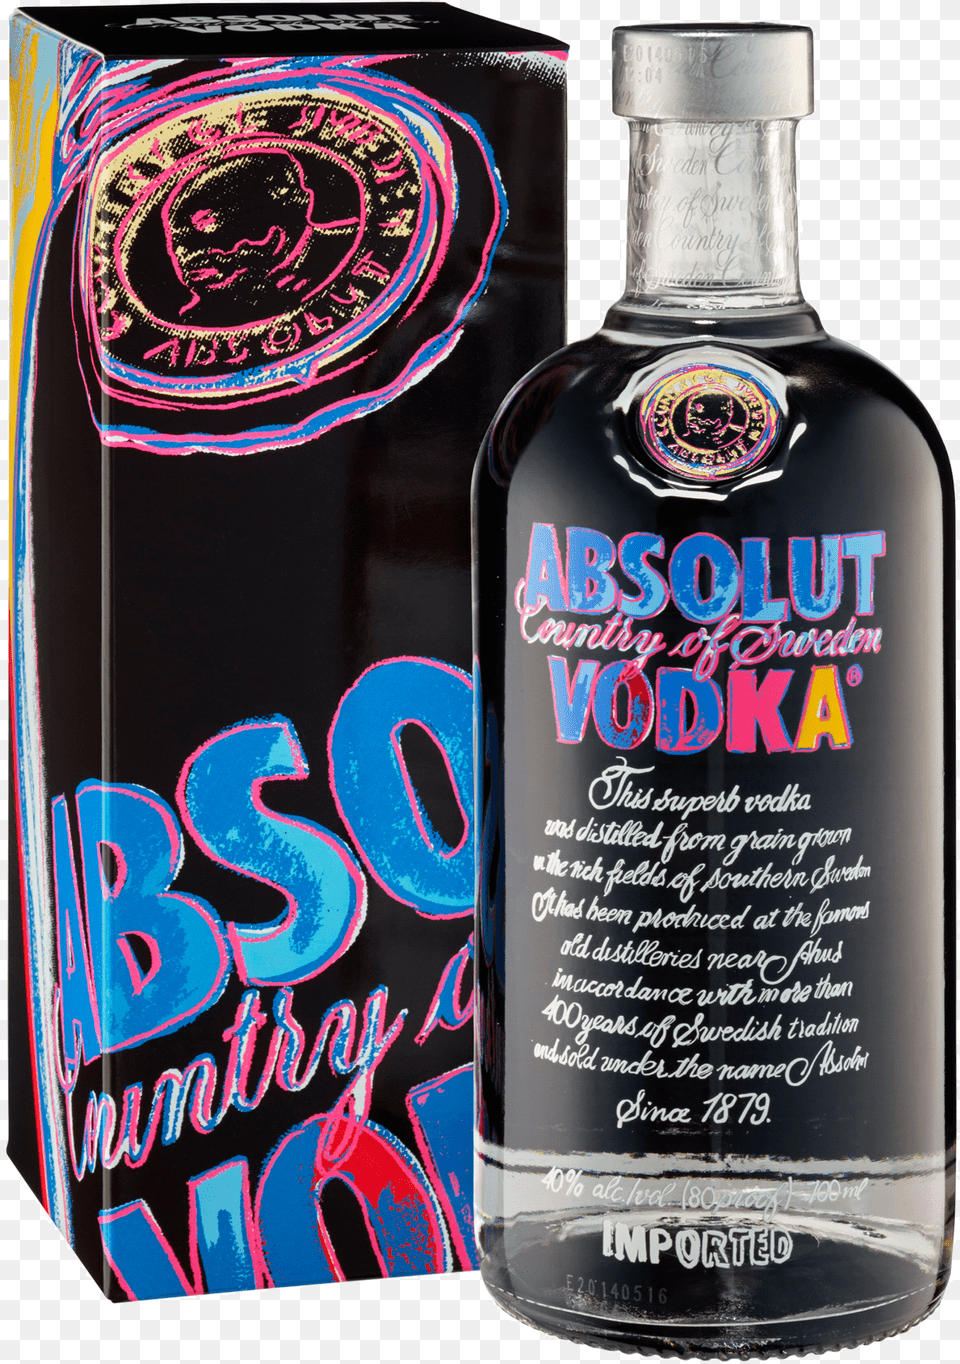 Absolut Andy Warhol Vodka 700ml Bottle Absolut Andy Warhol Edition Vodka, Alcohol, Beverage, Liquor, Cosmetics Free Png